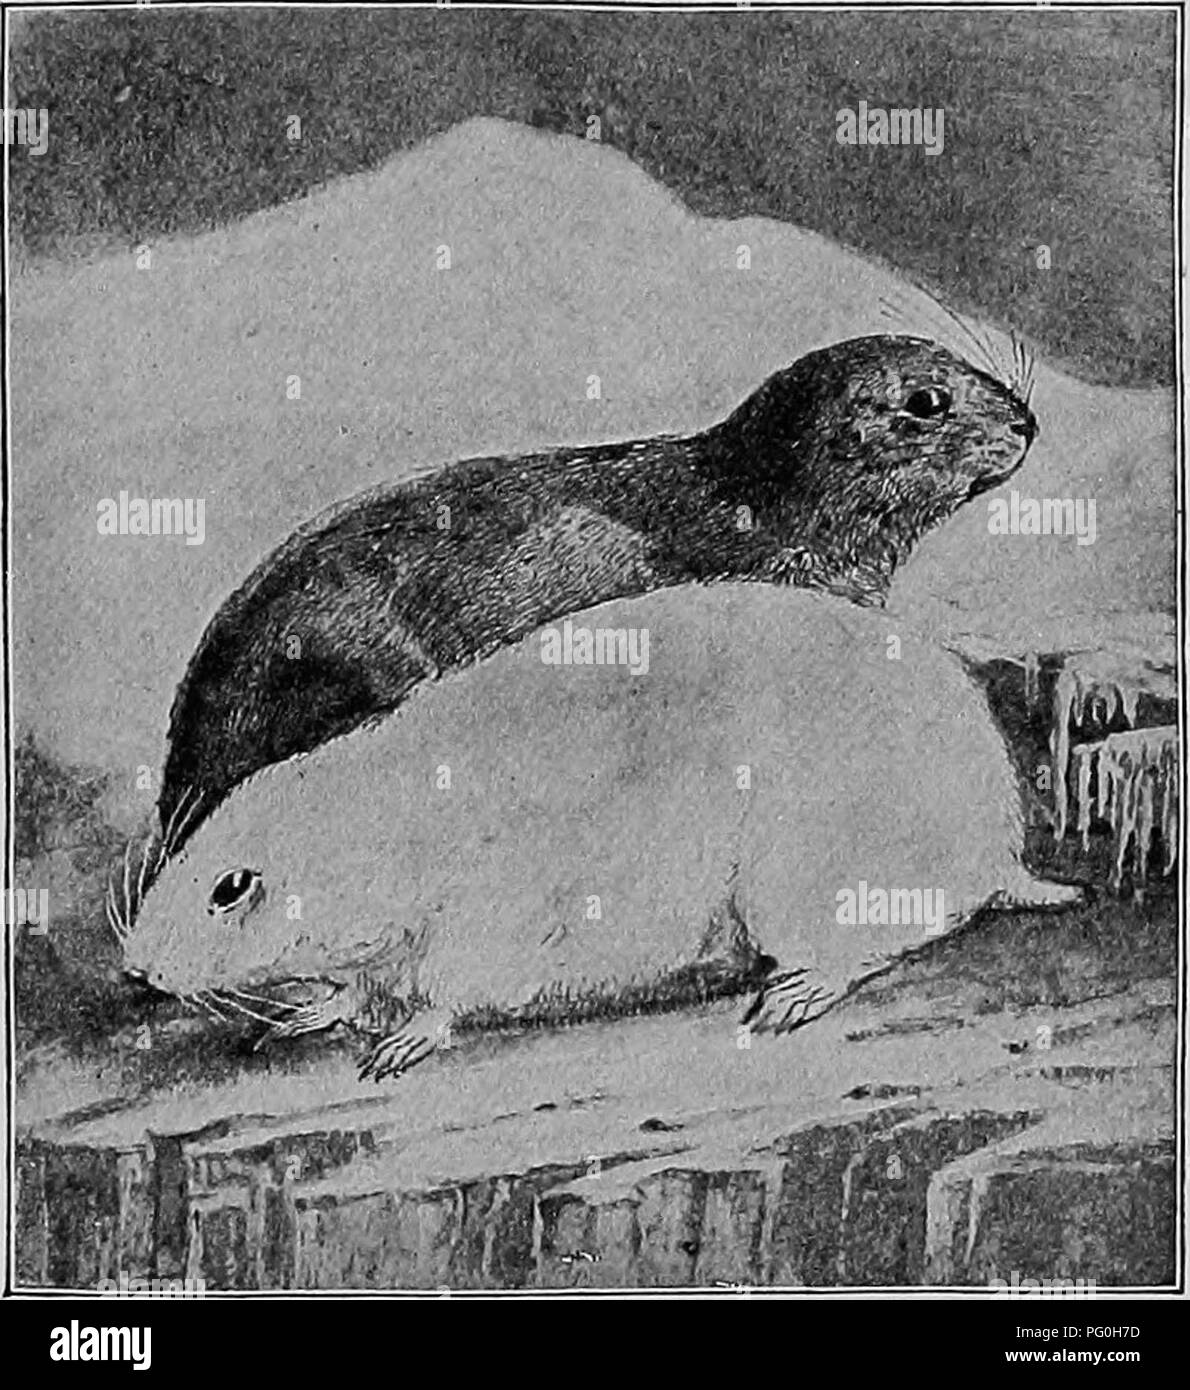 . The American natural history; a foundation of useful knowledge of the higher animals of North America. Natural history. THE HUDSON BAY LEMMING 225 the west Alaskan Eskimo, skins are very common, and the children delight in using them for doll clothes. This animal is about the size of a large mole, thick- bodied, short-legged, and sharp-nosed. The ears are extremely. HUDSON BAY LEMMING. Winter and summer pelage. short, and quite hidden in the fur; the legs are short, the feet rat-like, and the tail is so very short that it also is half hidden by the fur. The fur is long, fluffy, and fine; bro Stock Photo